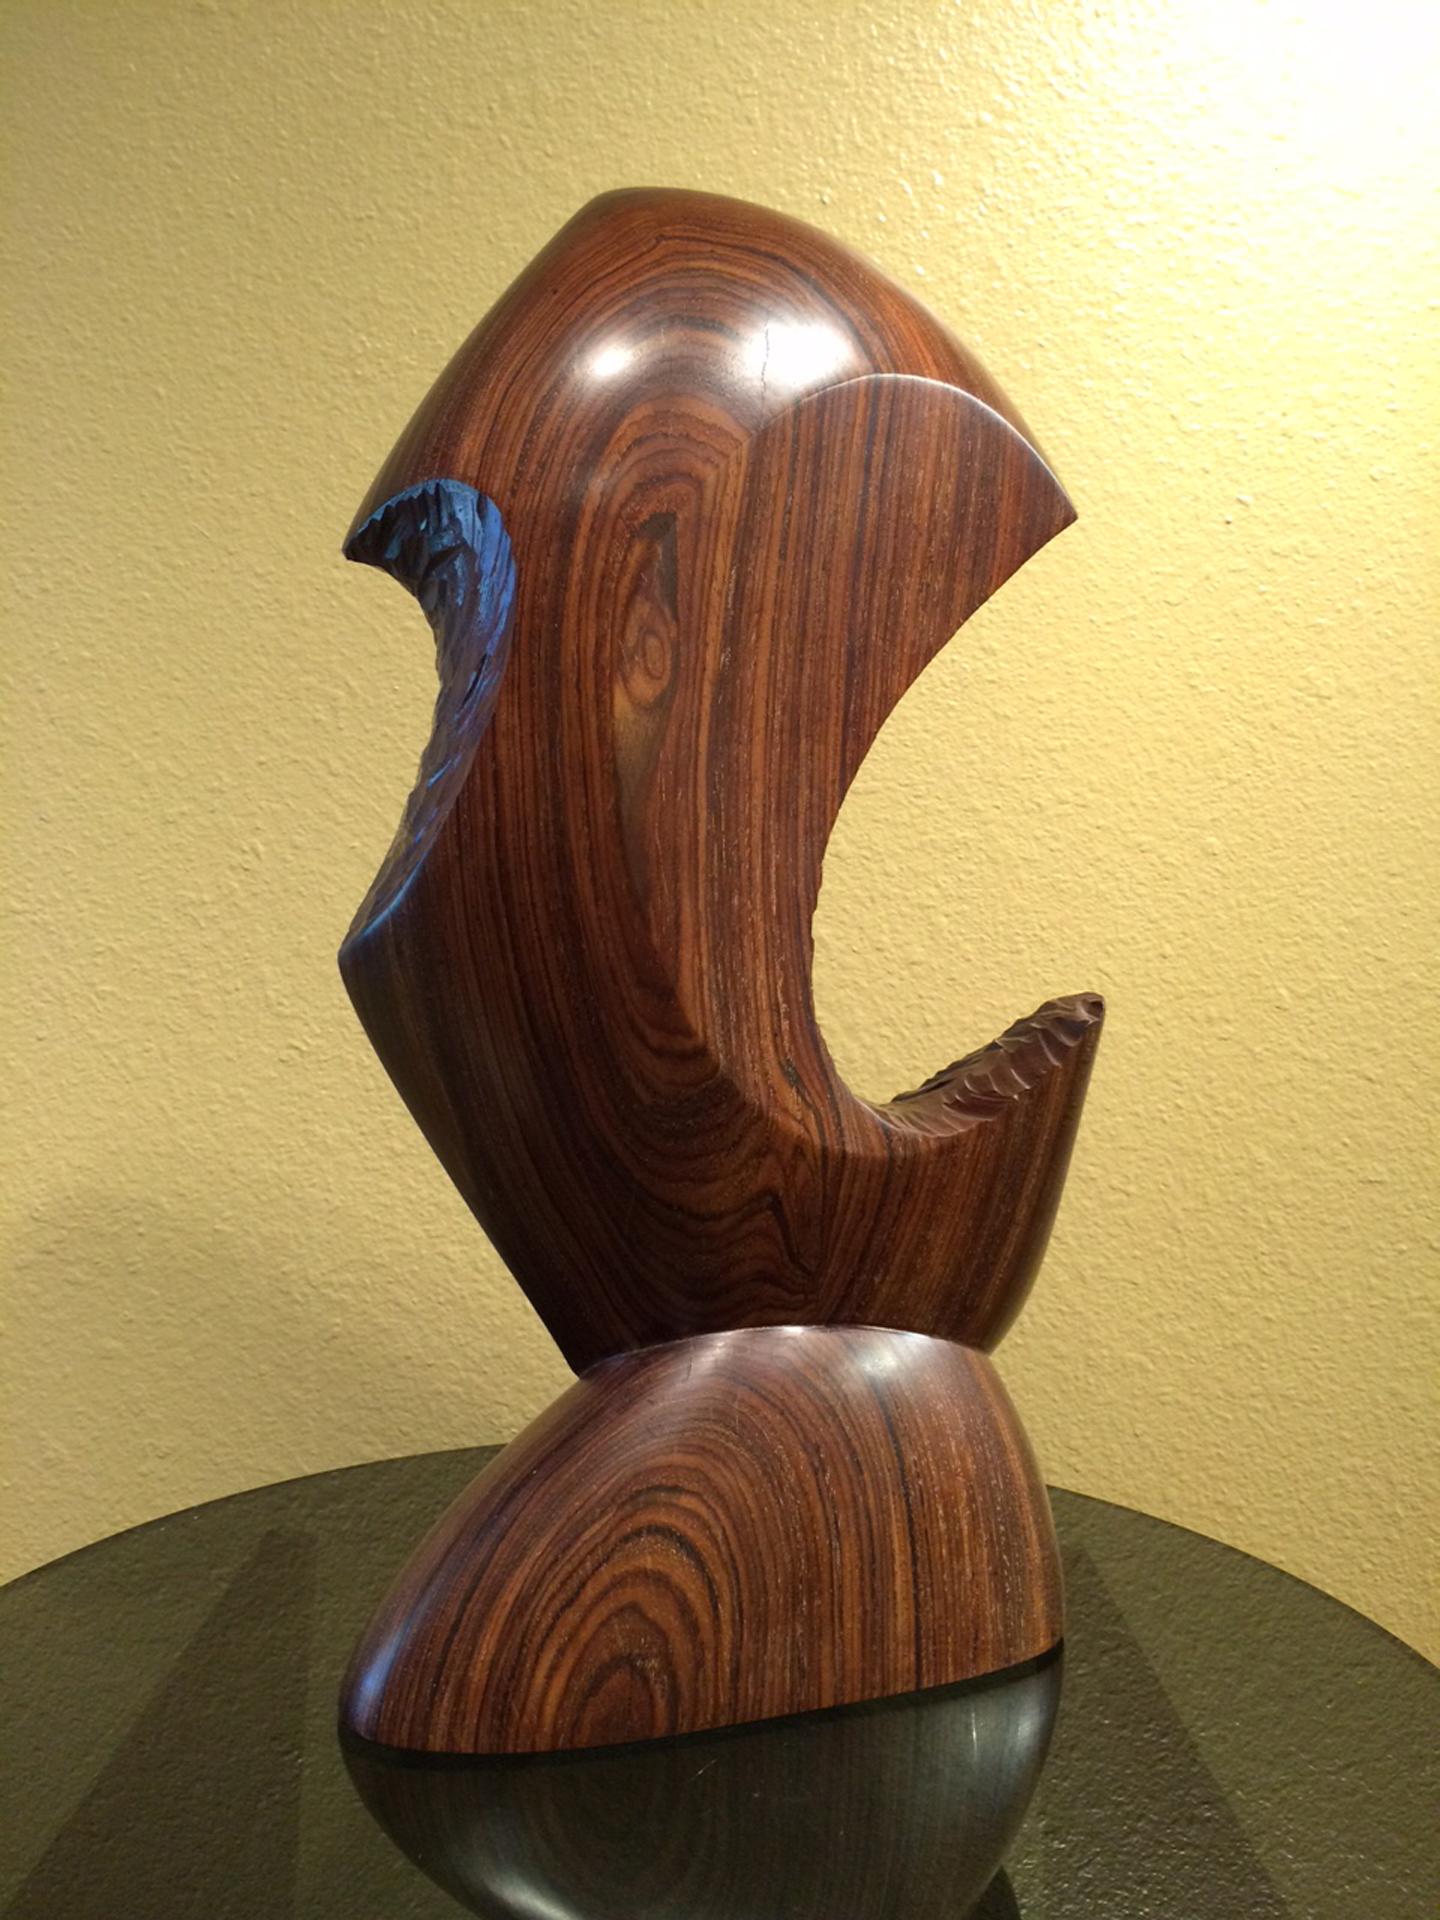 Leviathan, 17x10x4" Carved Cocobolo Wood sculpture - Sculpture by Mark Leichliter